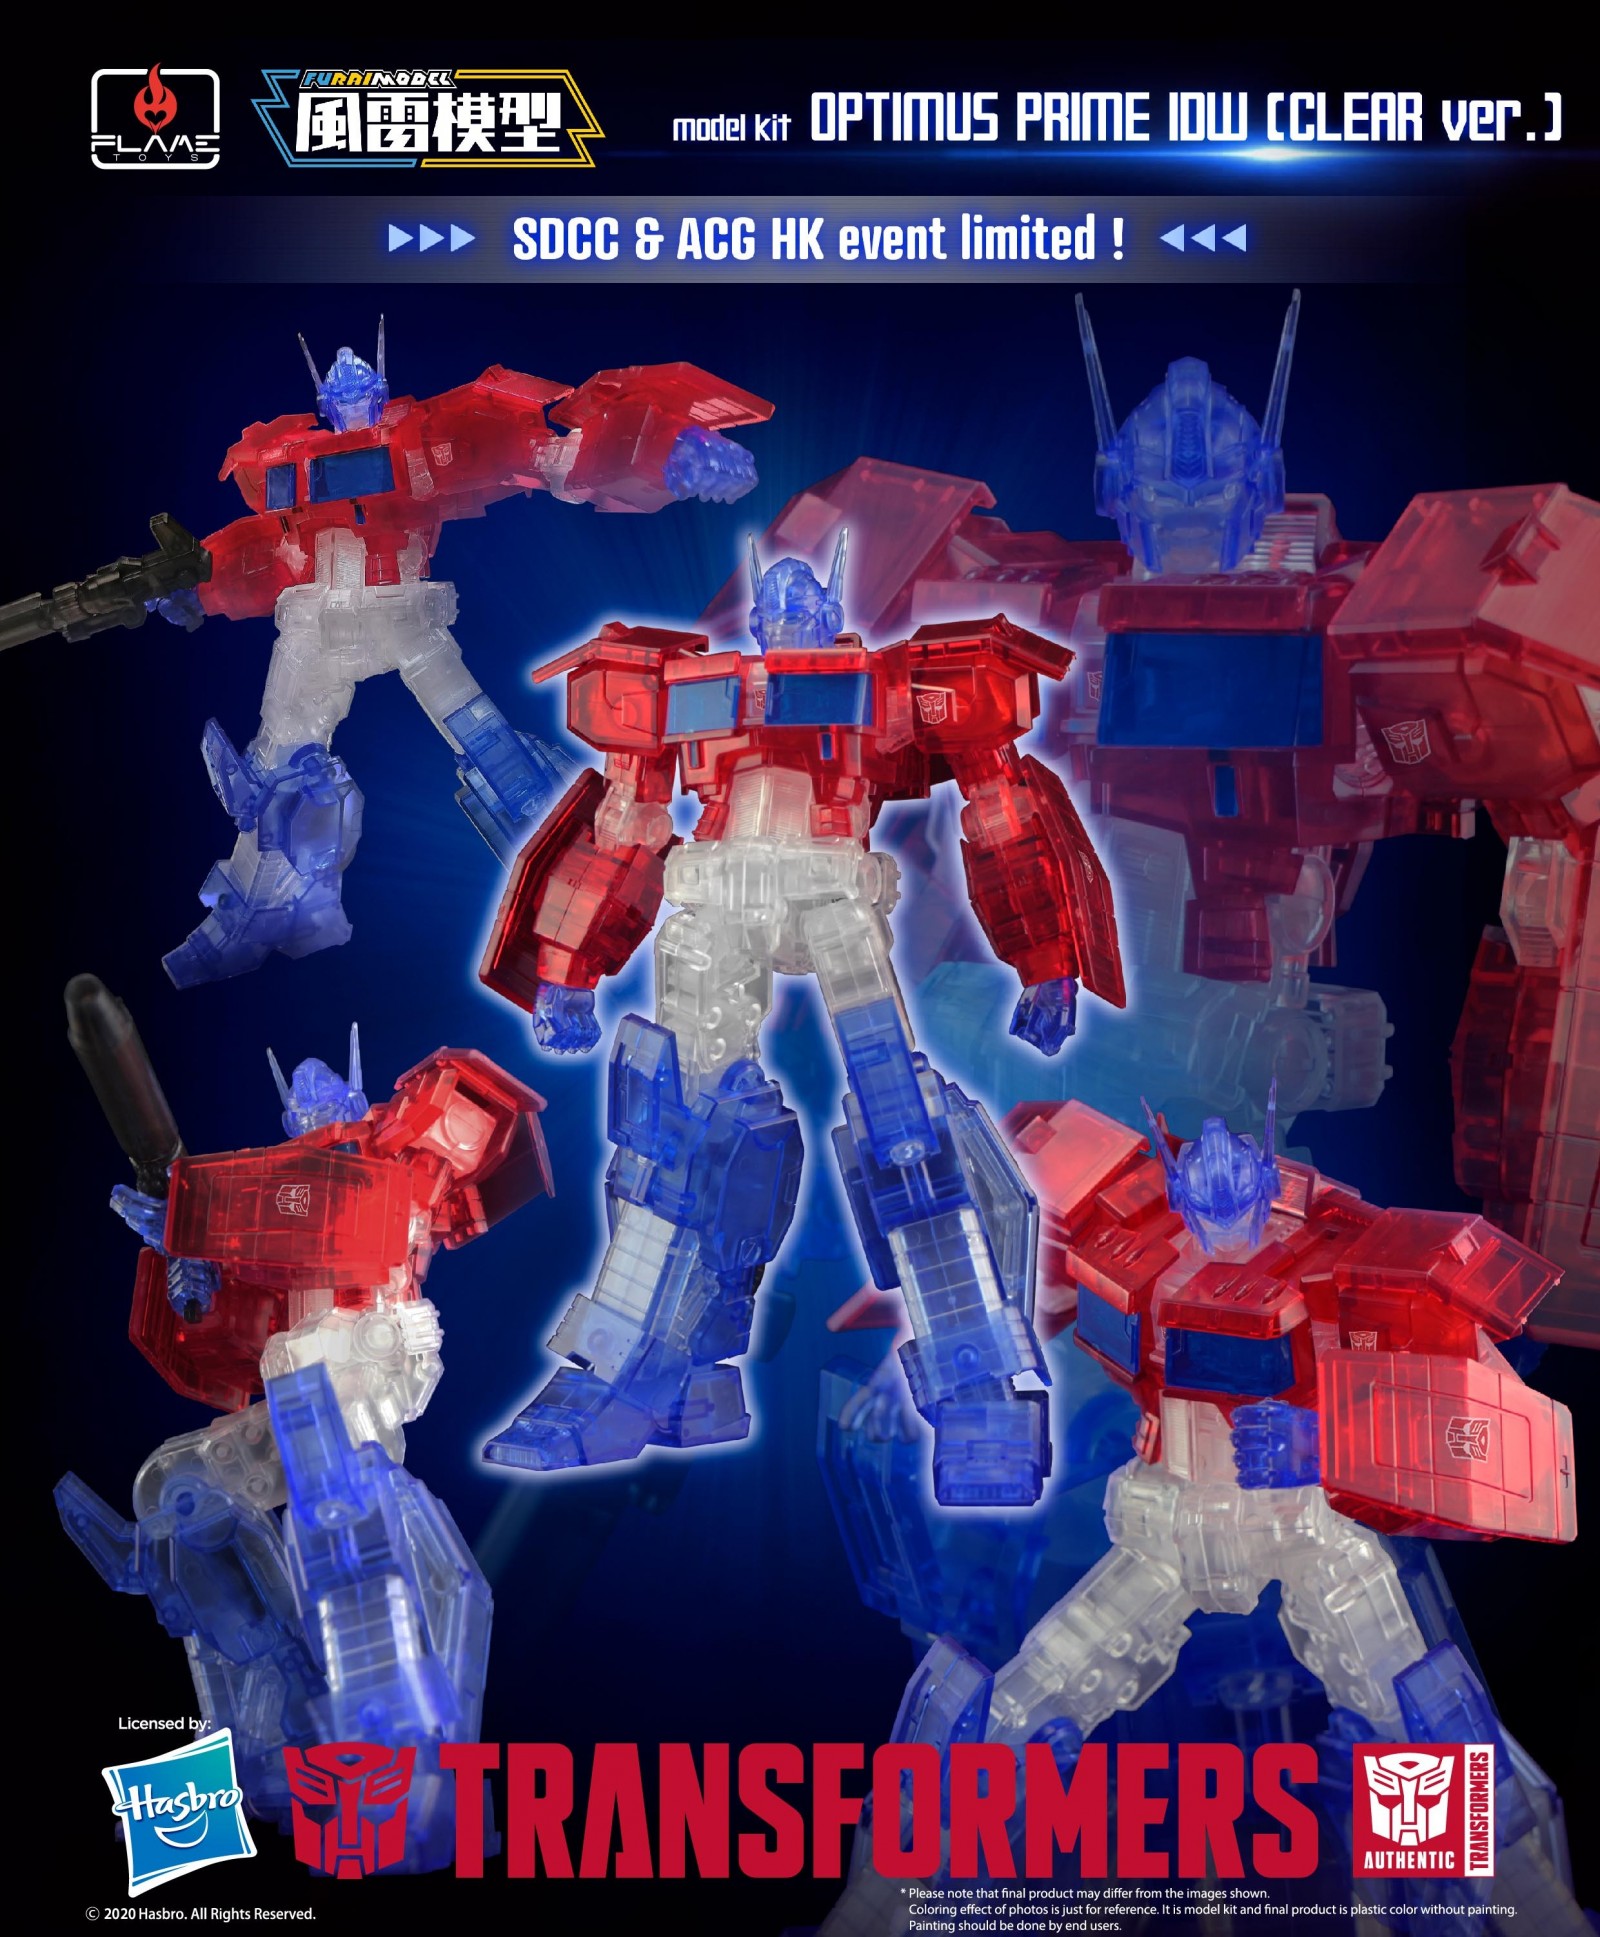 Transformers News: Flame Toys Limited Edition Furai IDW Optimus Prime Clear Version Release Details